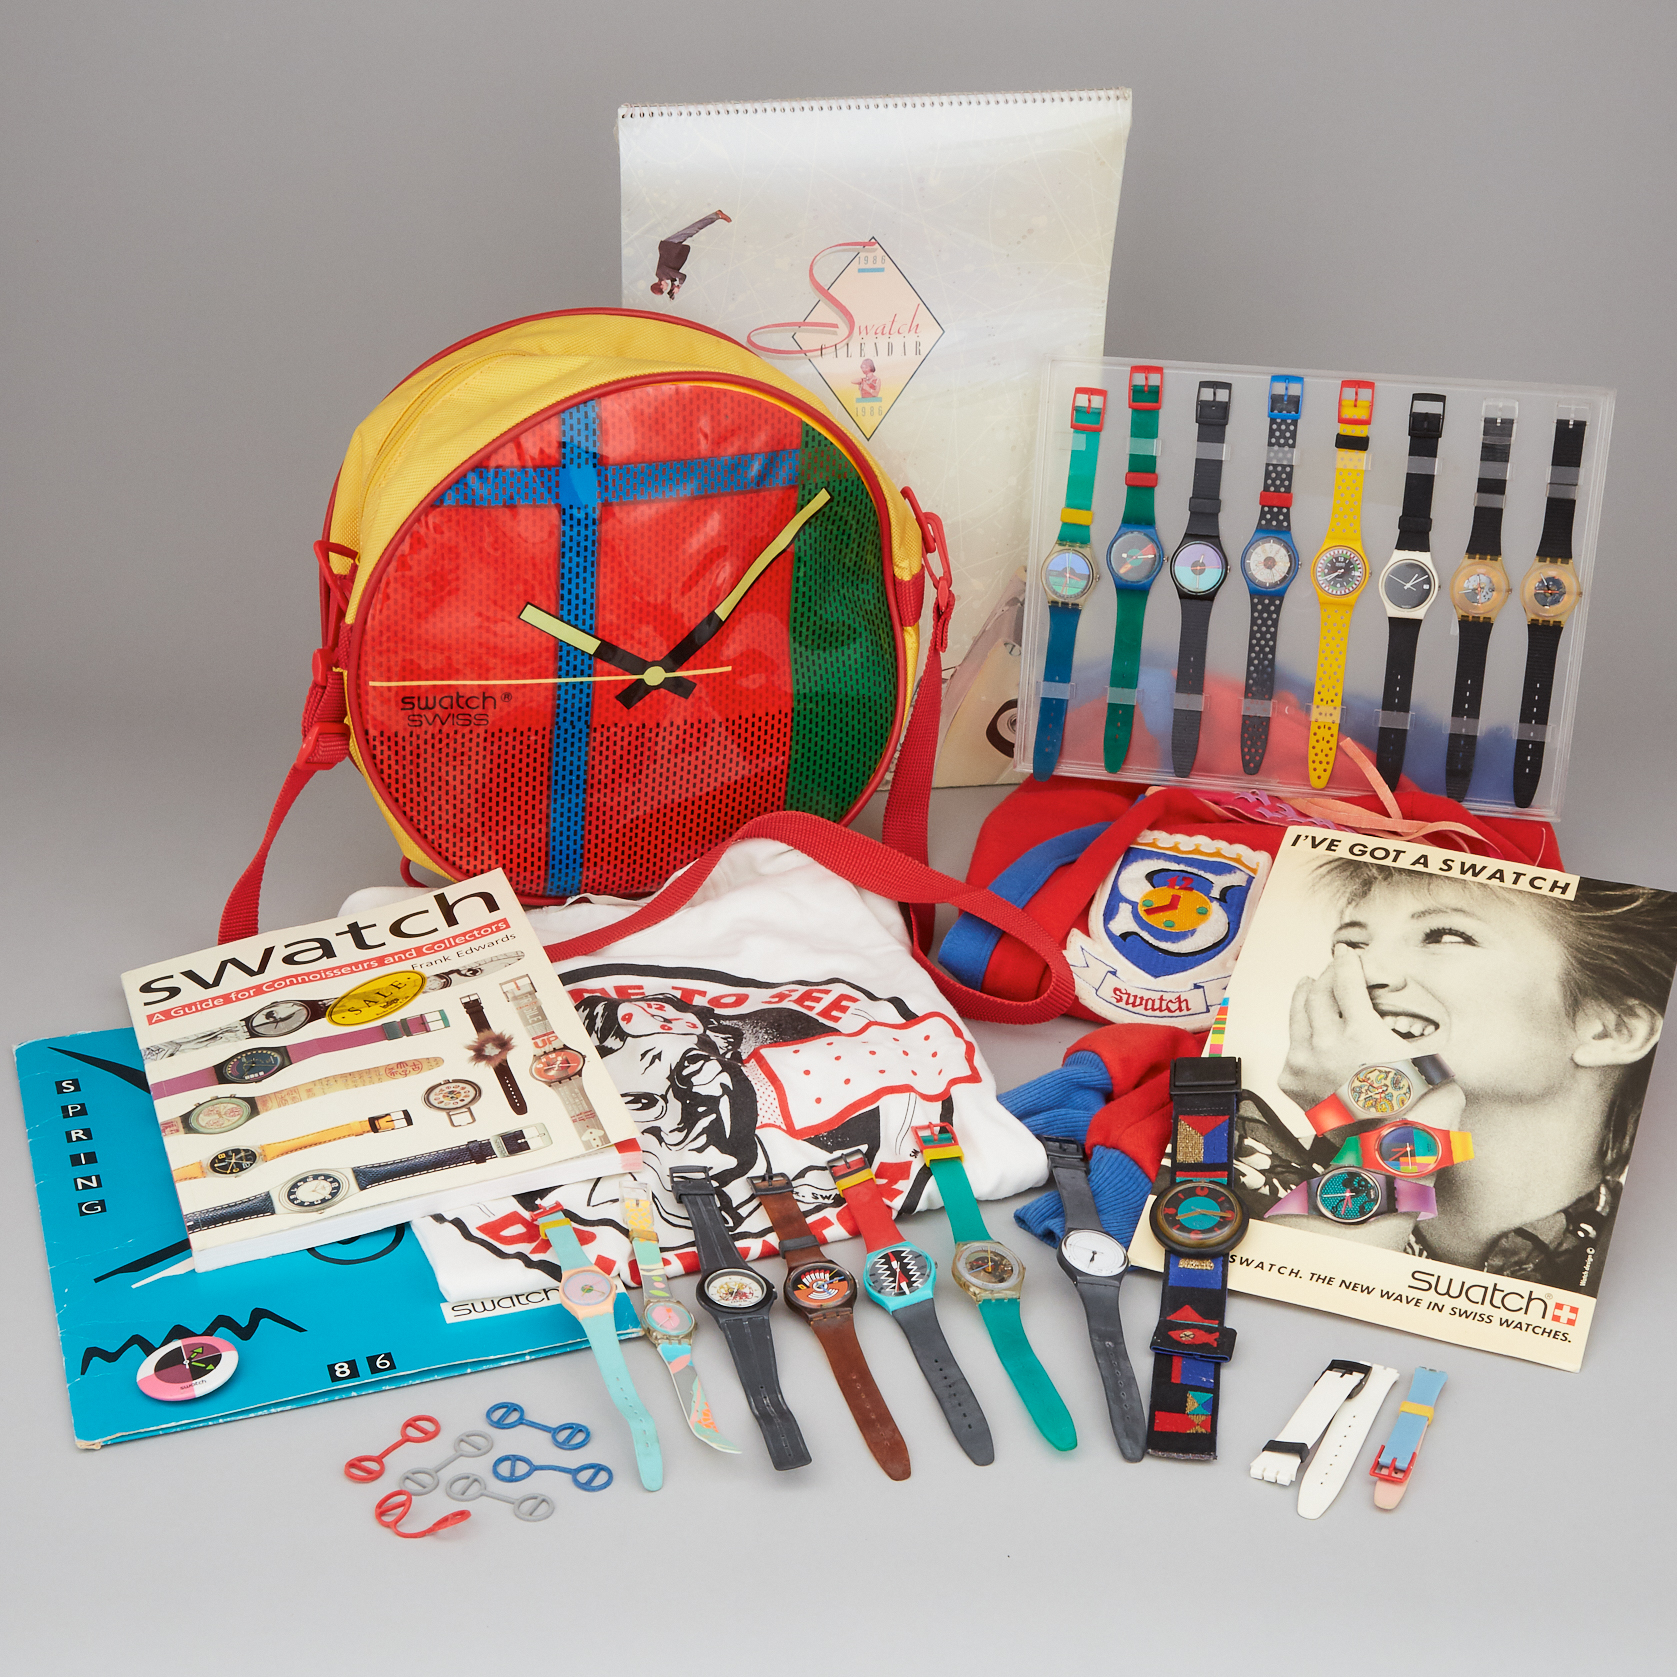 Collection of Swatch Watches and Related Promotional Material, c.1983-1990